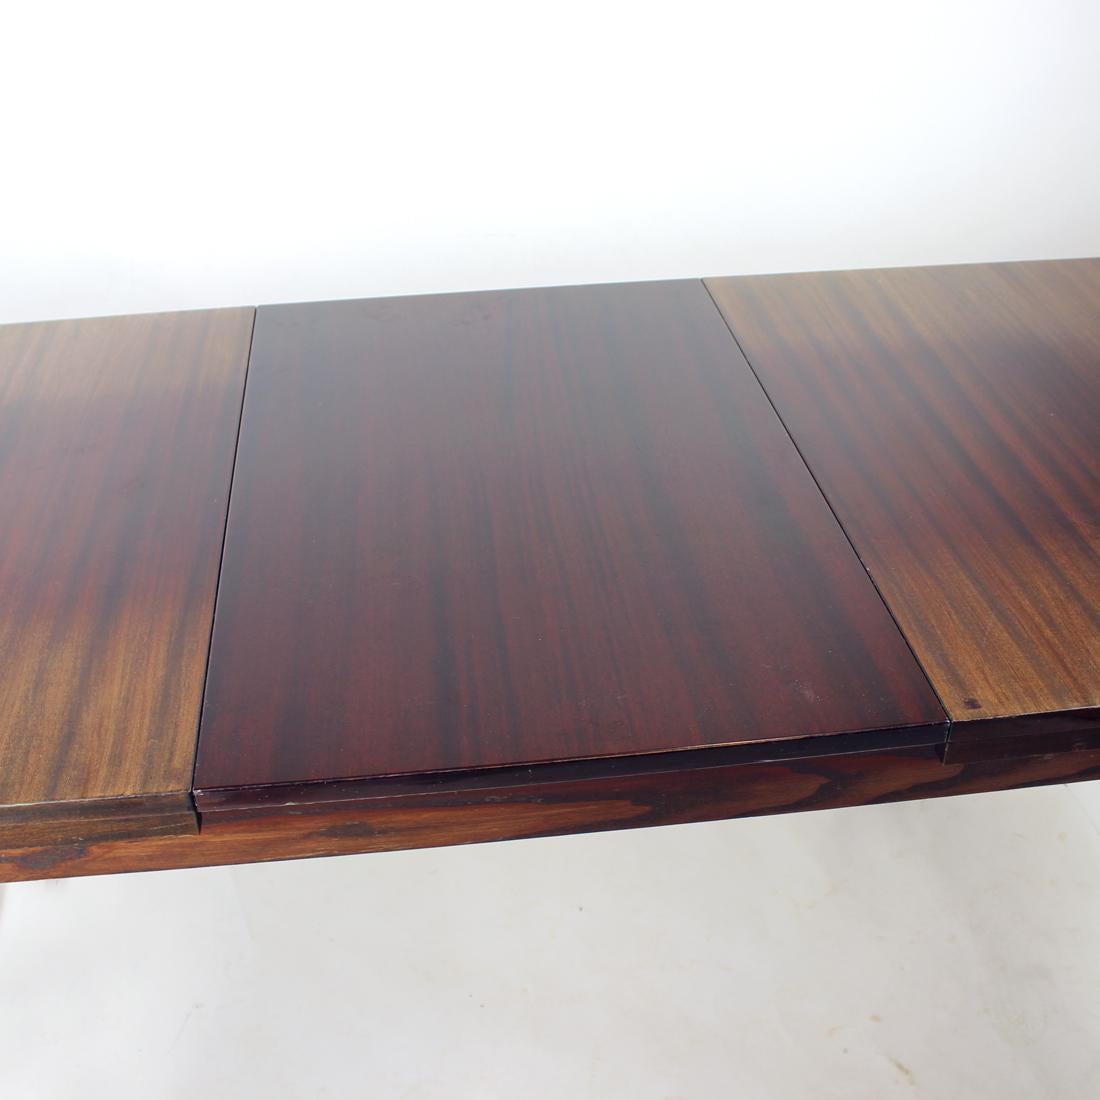 Beautiful mid-century table produced in 1960s by Jitona company. Original labels still attached on the bottom of the top boards. The table is produced in oak wood with mahogany veneer on the top board and high sheen finish. The legs are in square